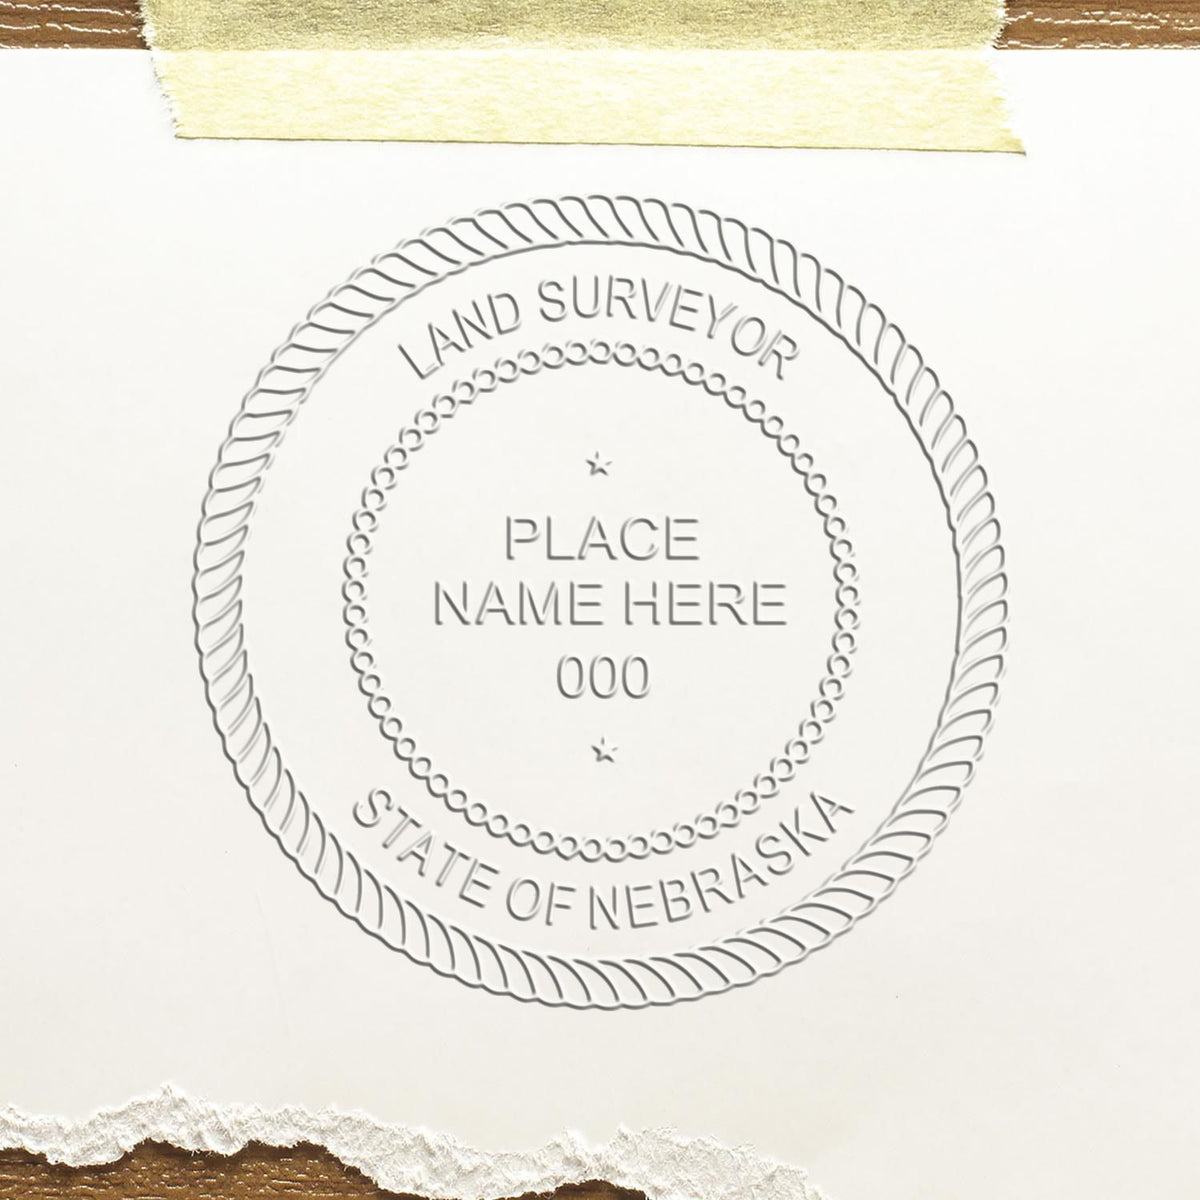 The Long Reach Nebraska Land Surveyor Seal stamp impression comes to life with a crisp, detailed photo on paper - showcasing true professional quality.